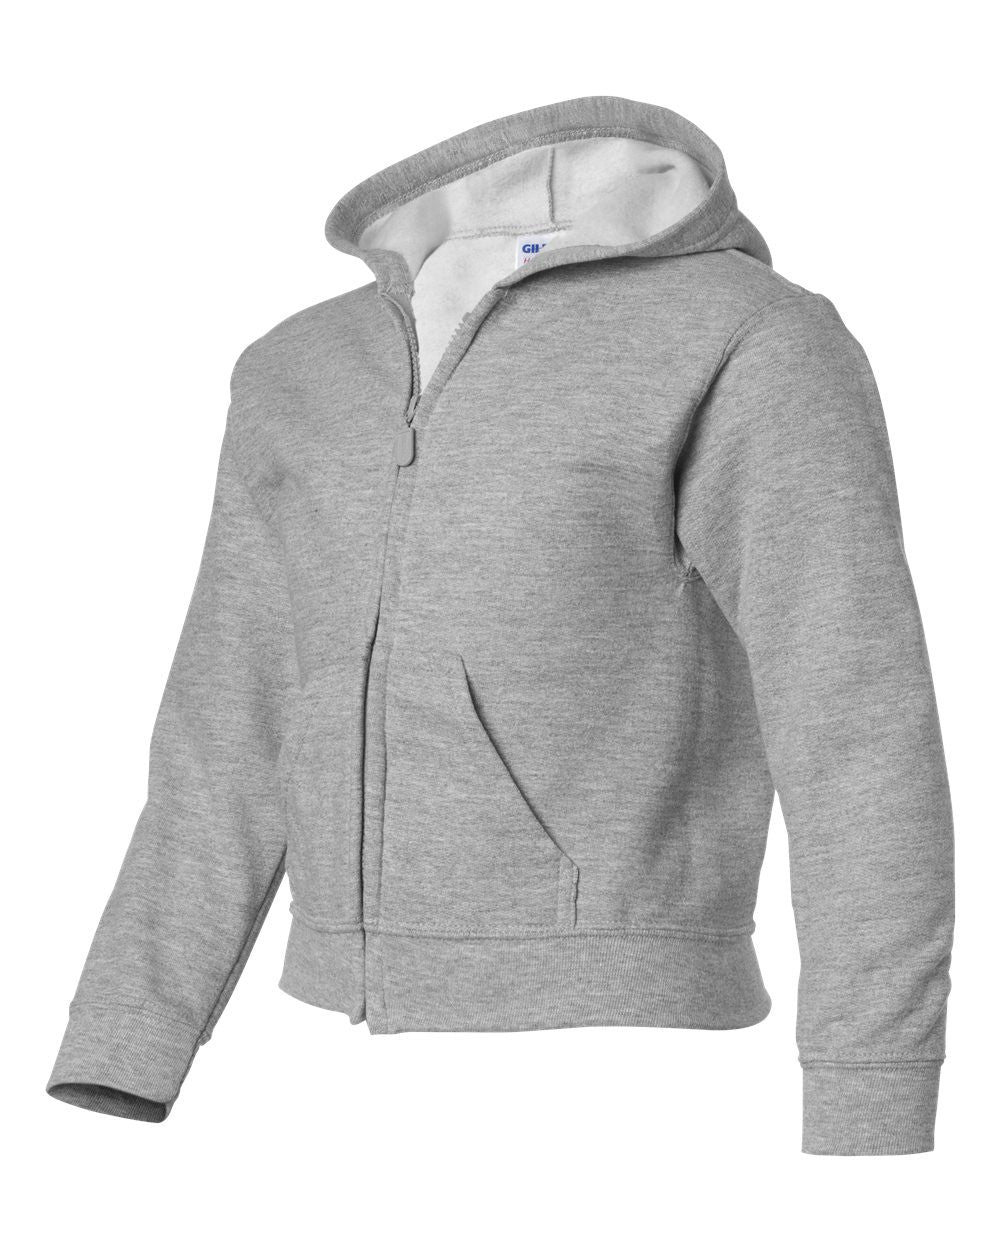 Youth Zip Hoodie Upgrade for Your Airbrushed Design